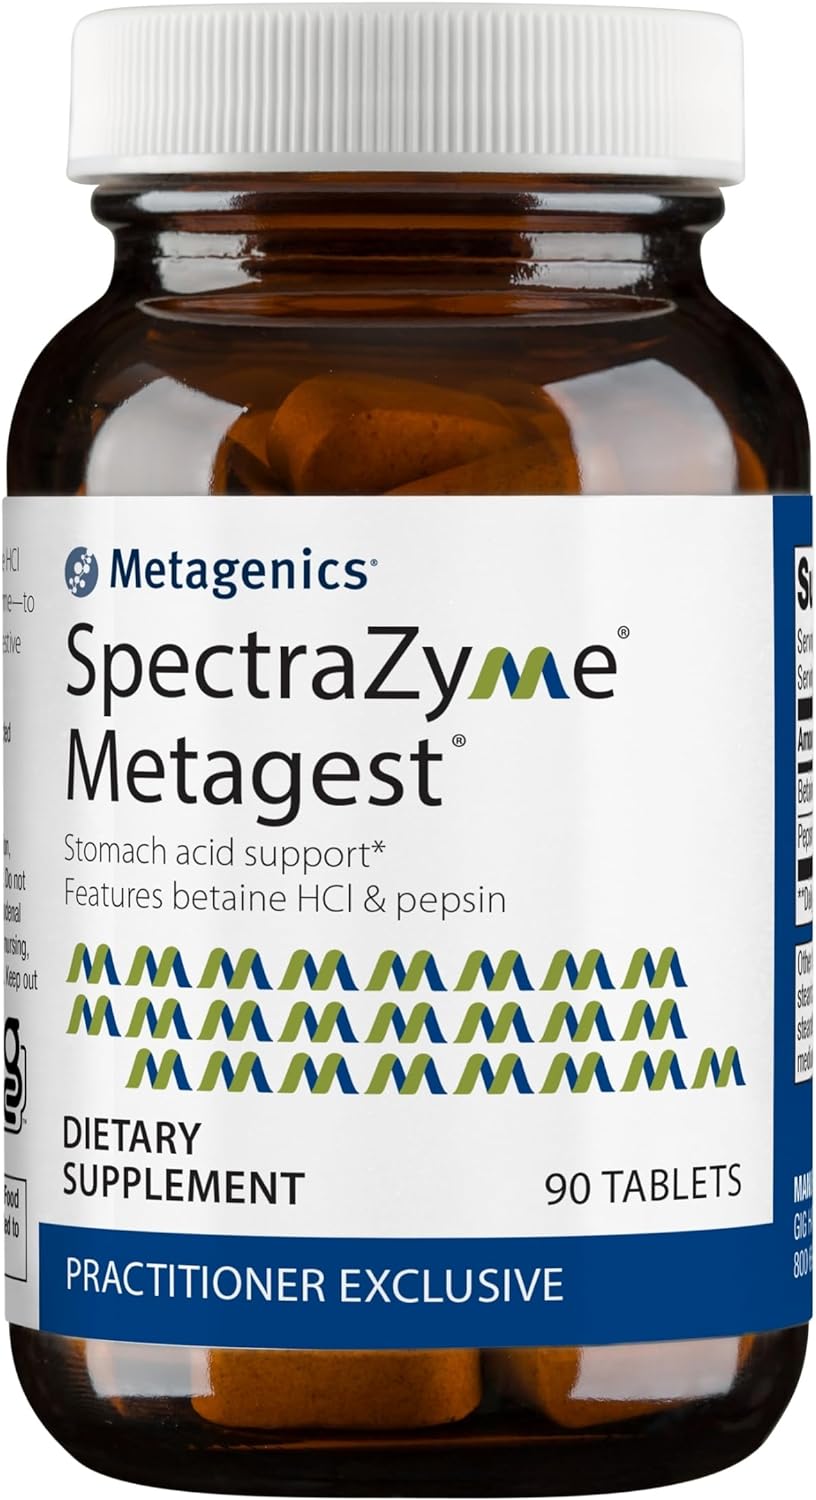 Metagenics SpectraZyme Metagest Supplement with Betaine HCL and Pepsin